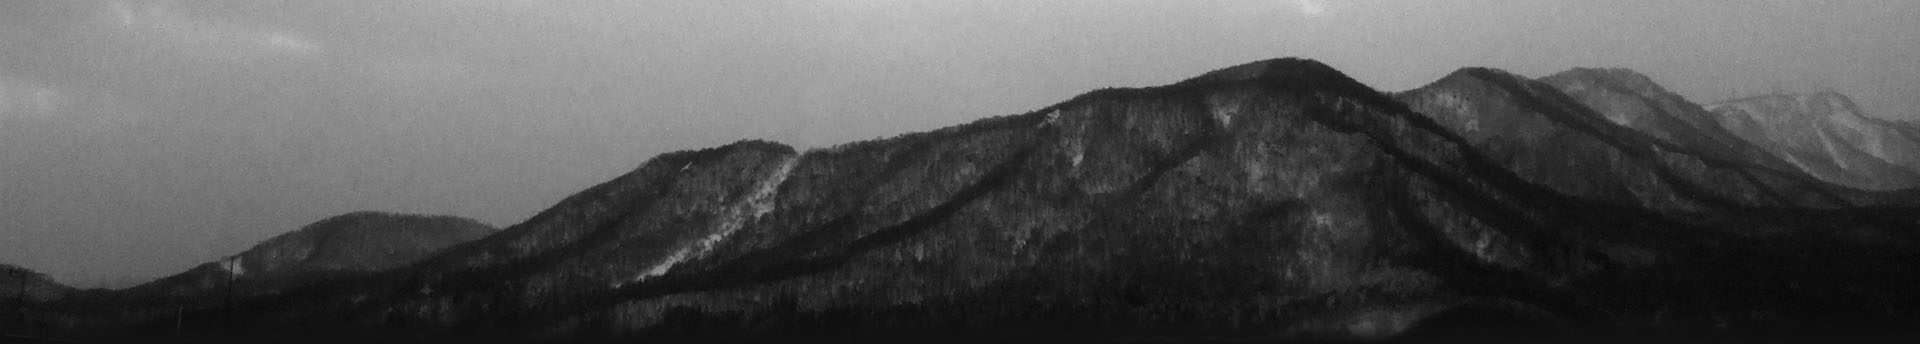 Image of Mt. Teine in Sapporo, Japan